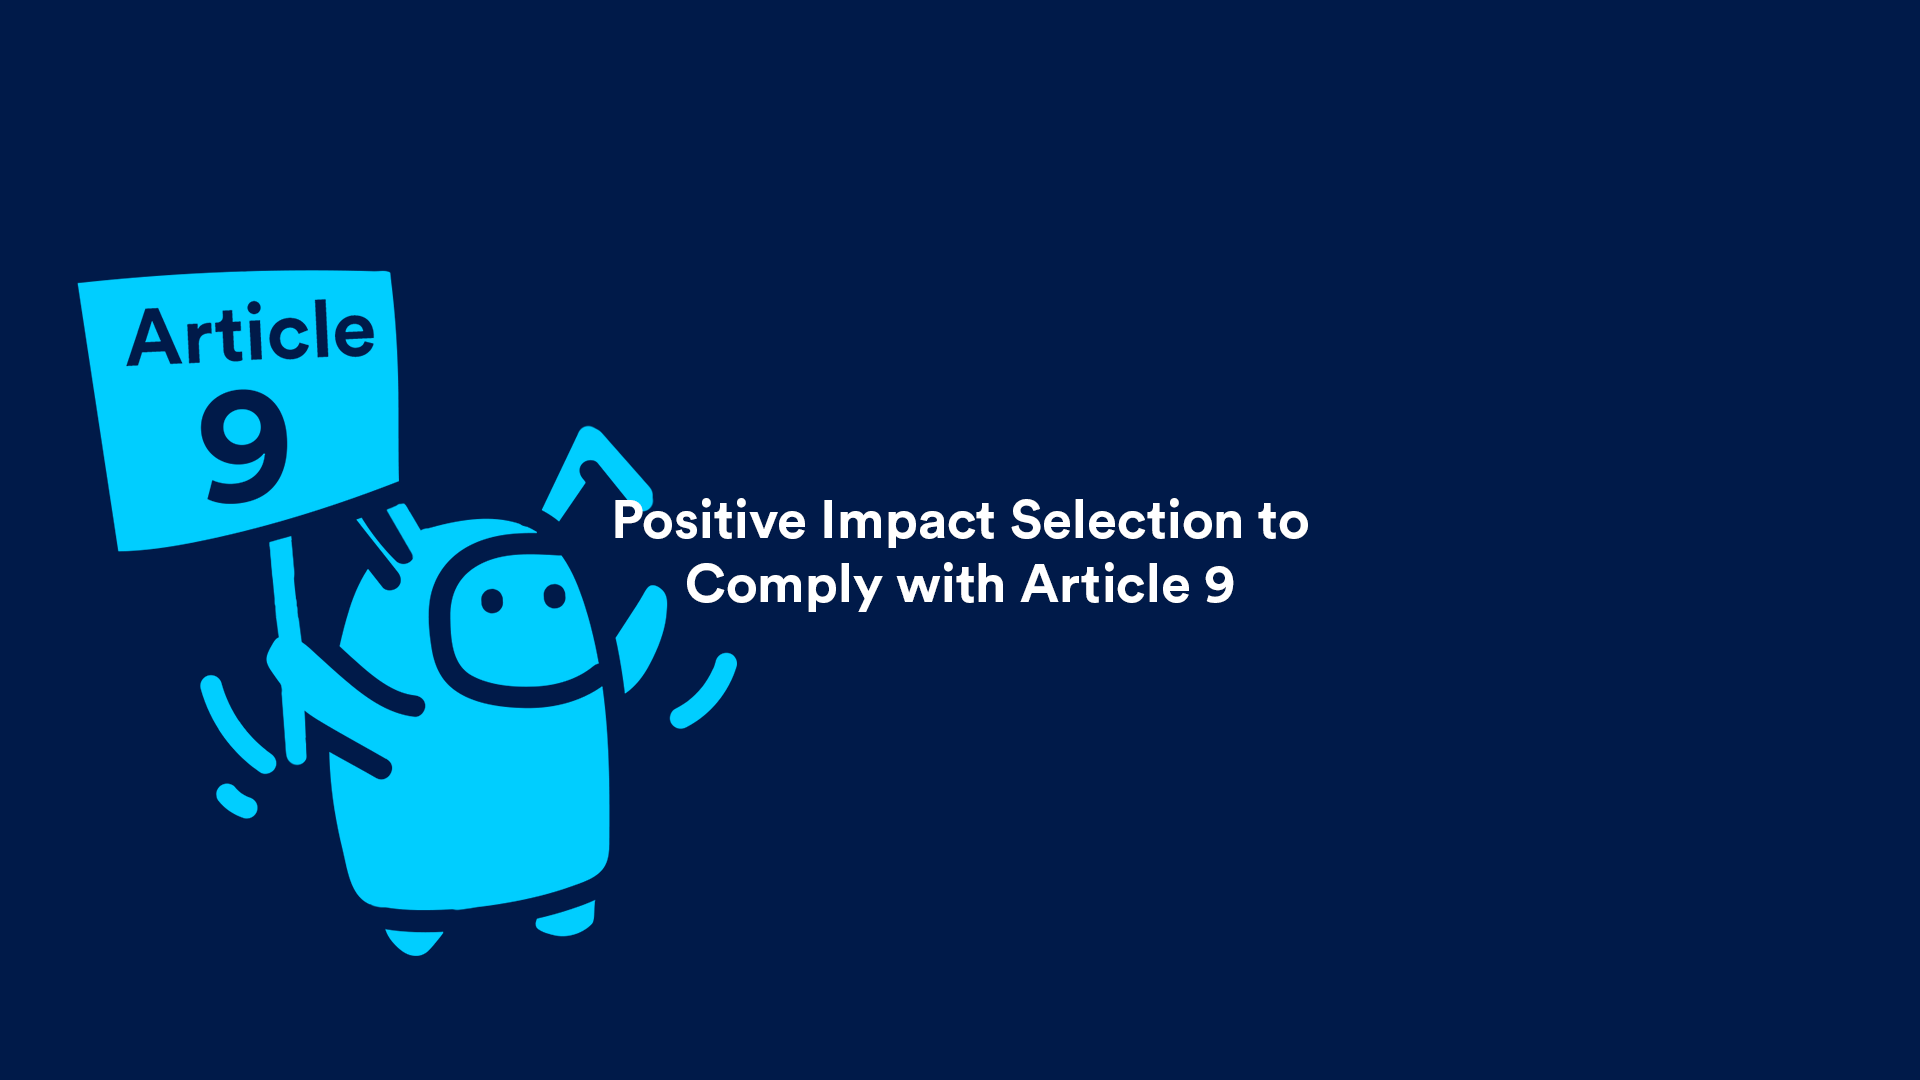 Positive Impact Selection to Comply with Article 9